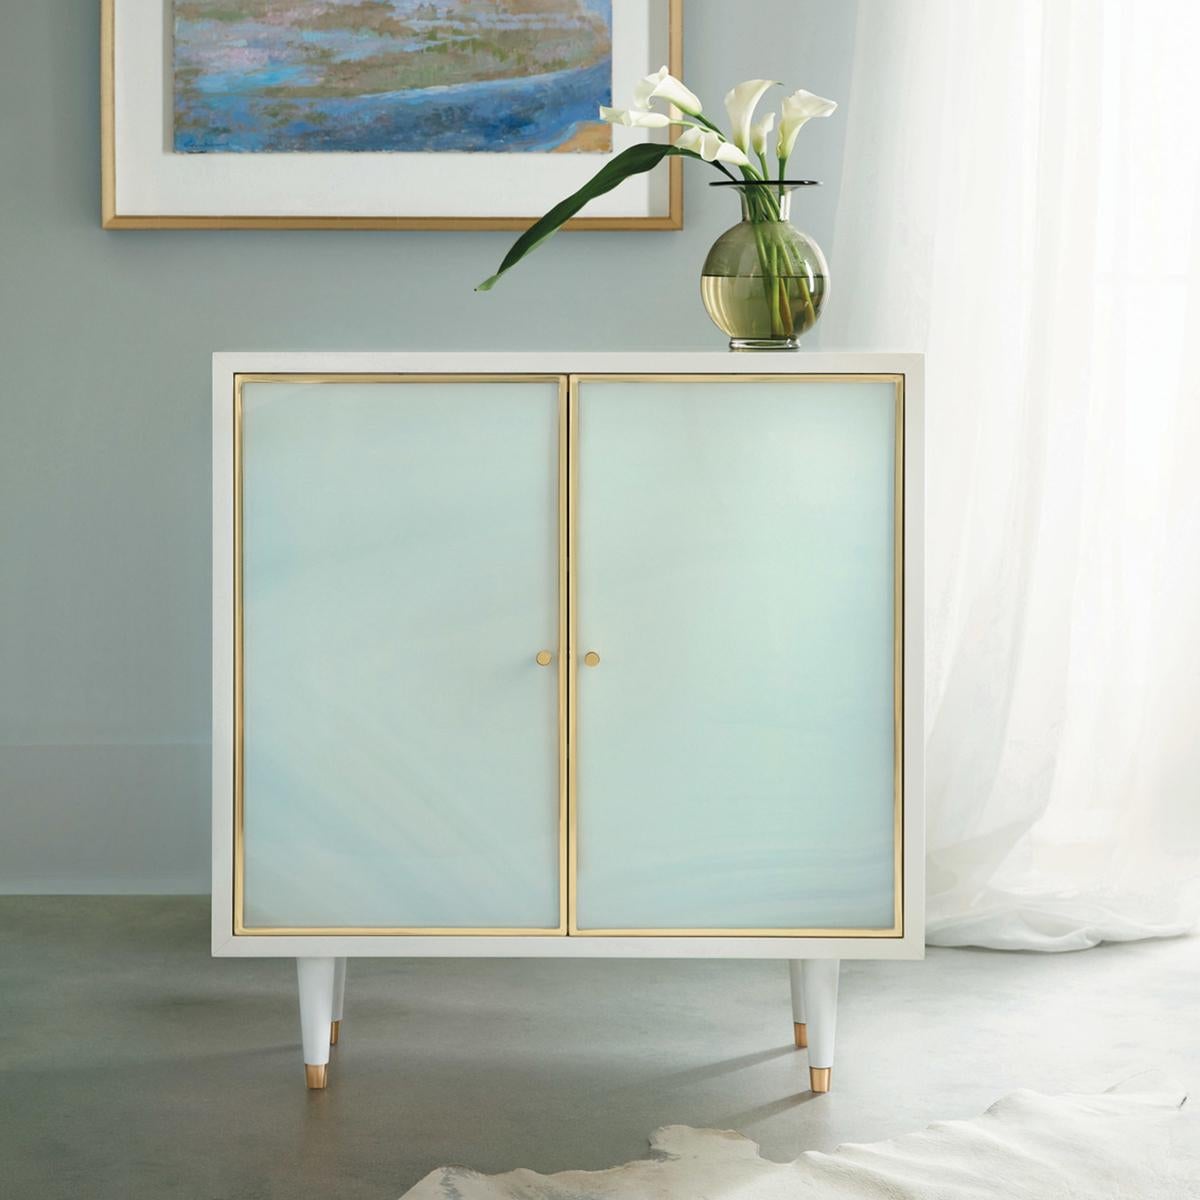 Coastal Sea Glass cabinet. With a white lacquer case and sea glass acrylic door fronts, this two-door cabinet has brass trim framed doors and knob pulls. Raised on turned and tapered legs.

Dimensions: 35